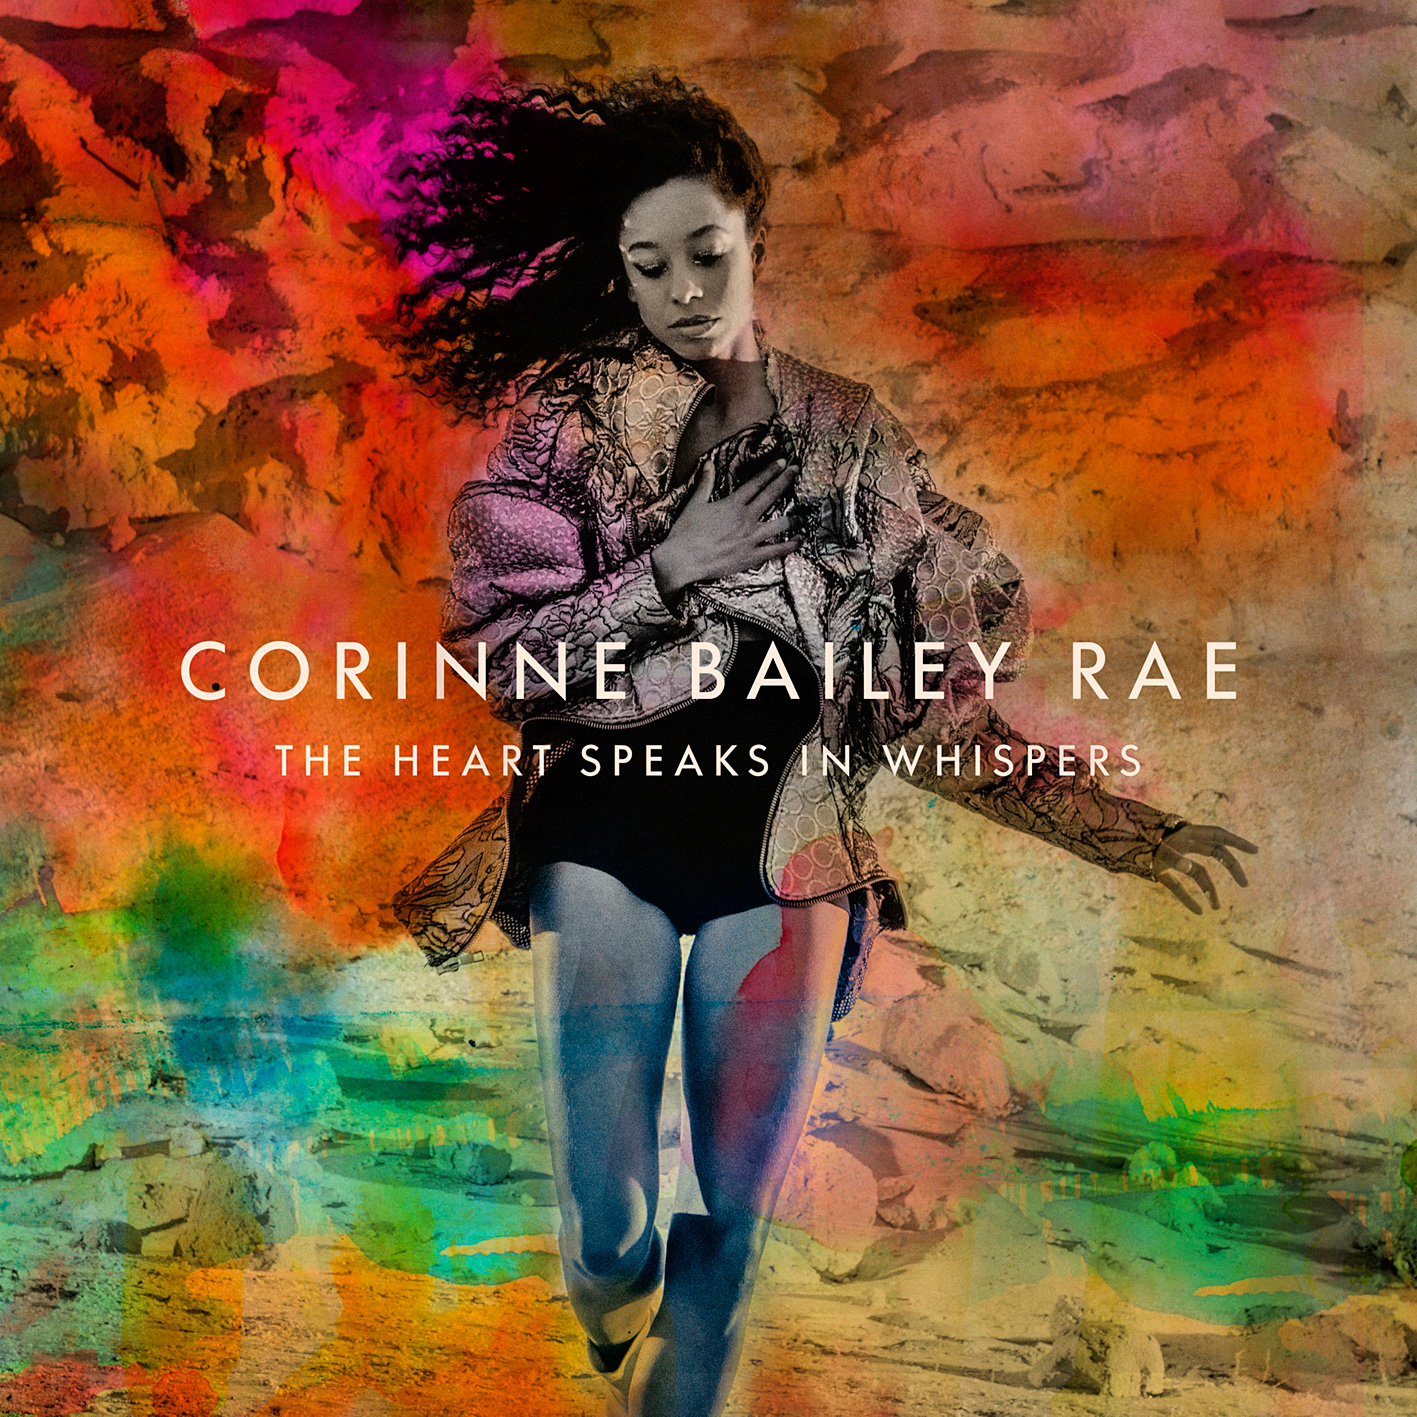 Corinne Bailey Rae - The Heart Speaks In Whispers {Deluxe Edition} (2016) [PonoMusic FLAC 24bit/96kHz]